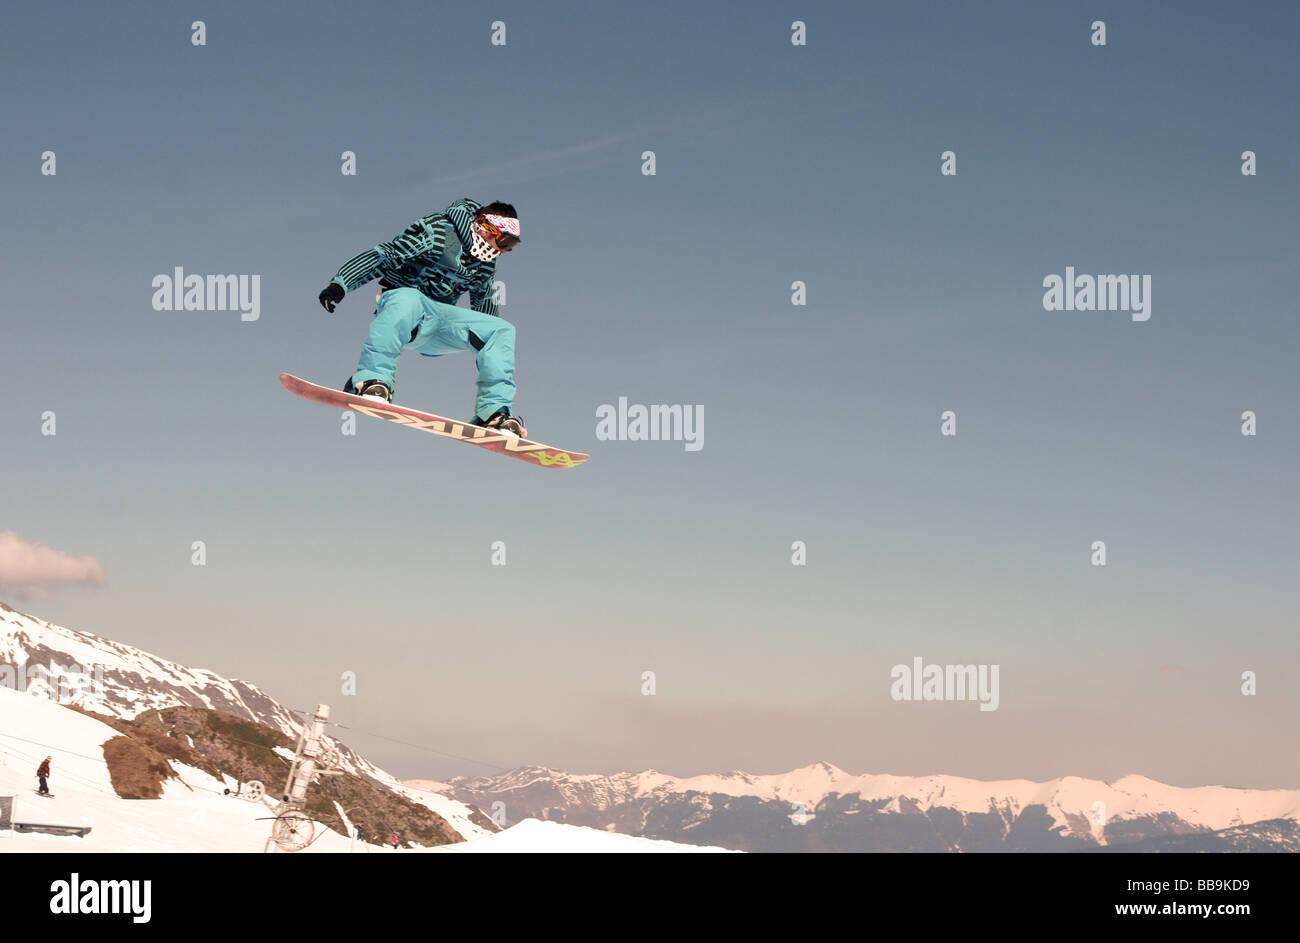 Winter Sports;Snow Boarder; Jumping Sequence No.6.;Male boarder about to land after a 'Big Air' jump. Stock Photo